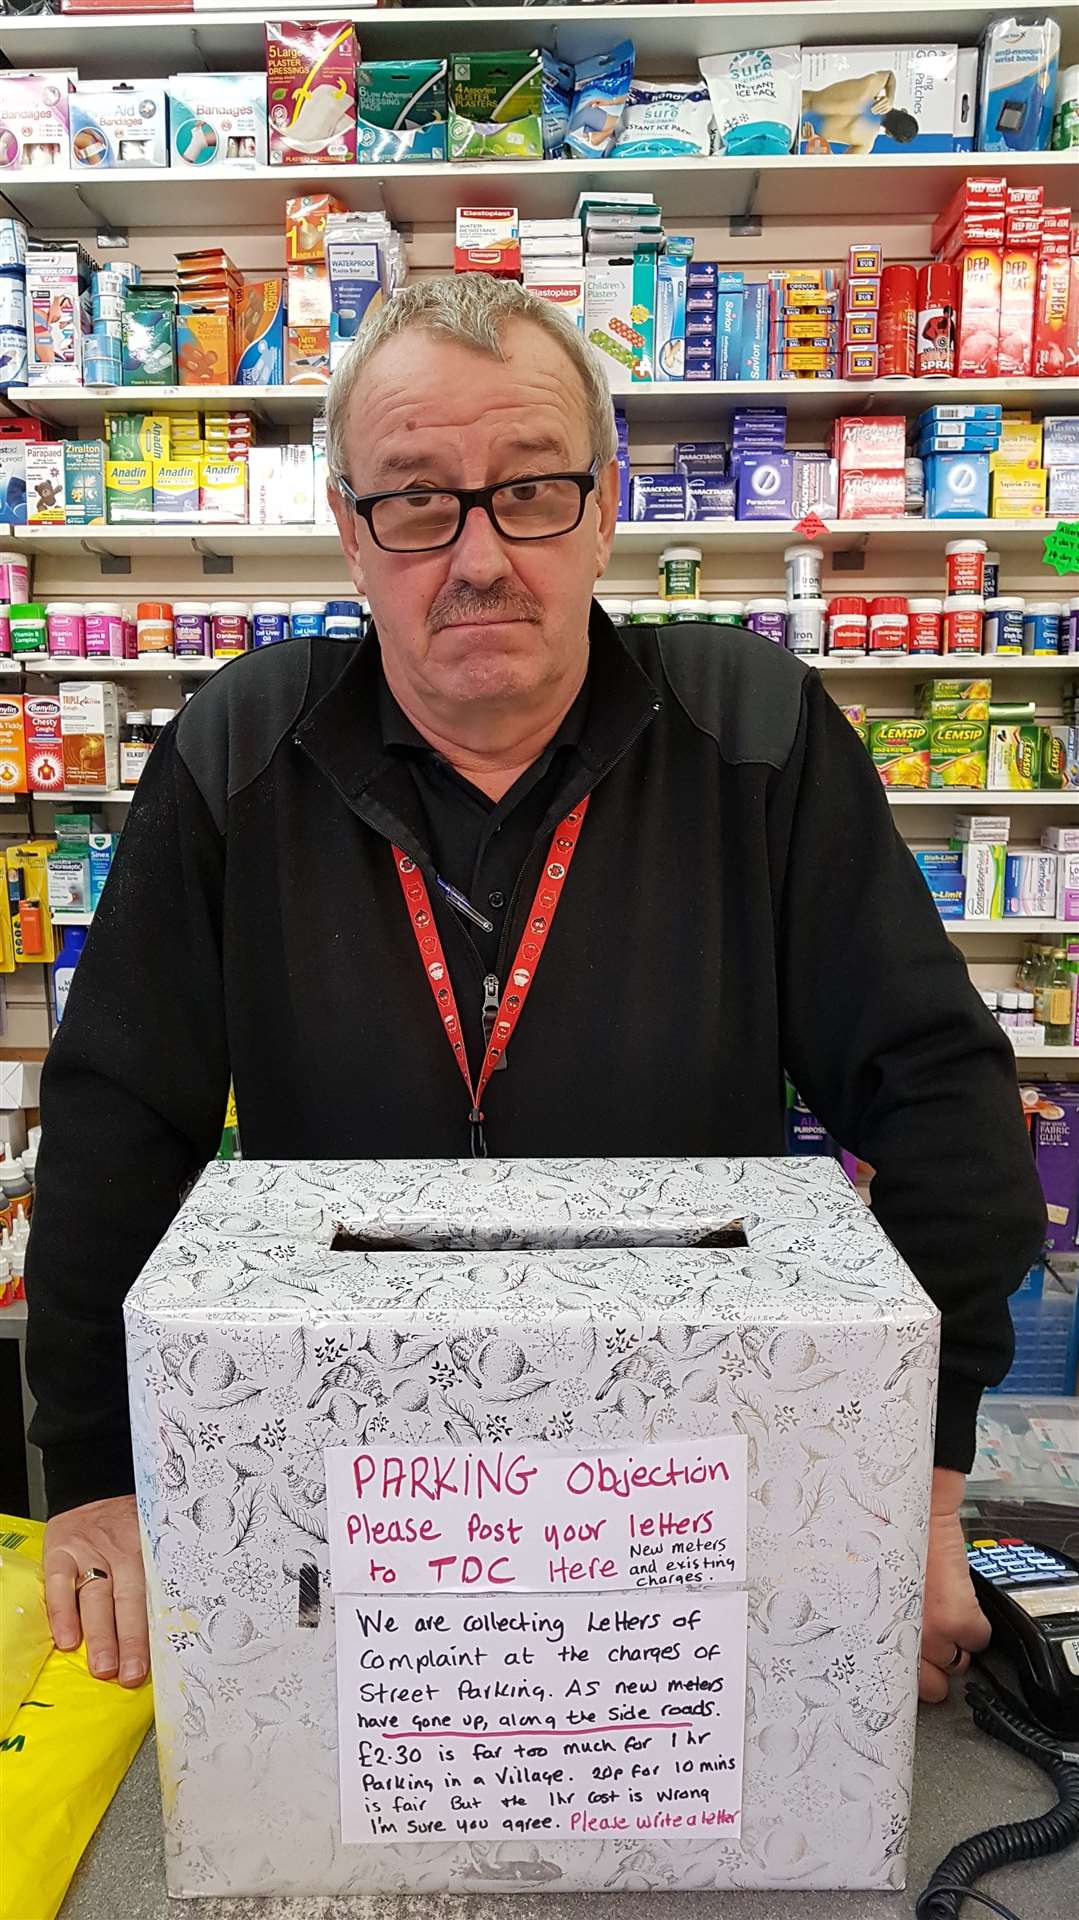 Nick Adams from Priceless Discount with the box of letters